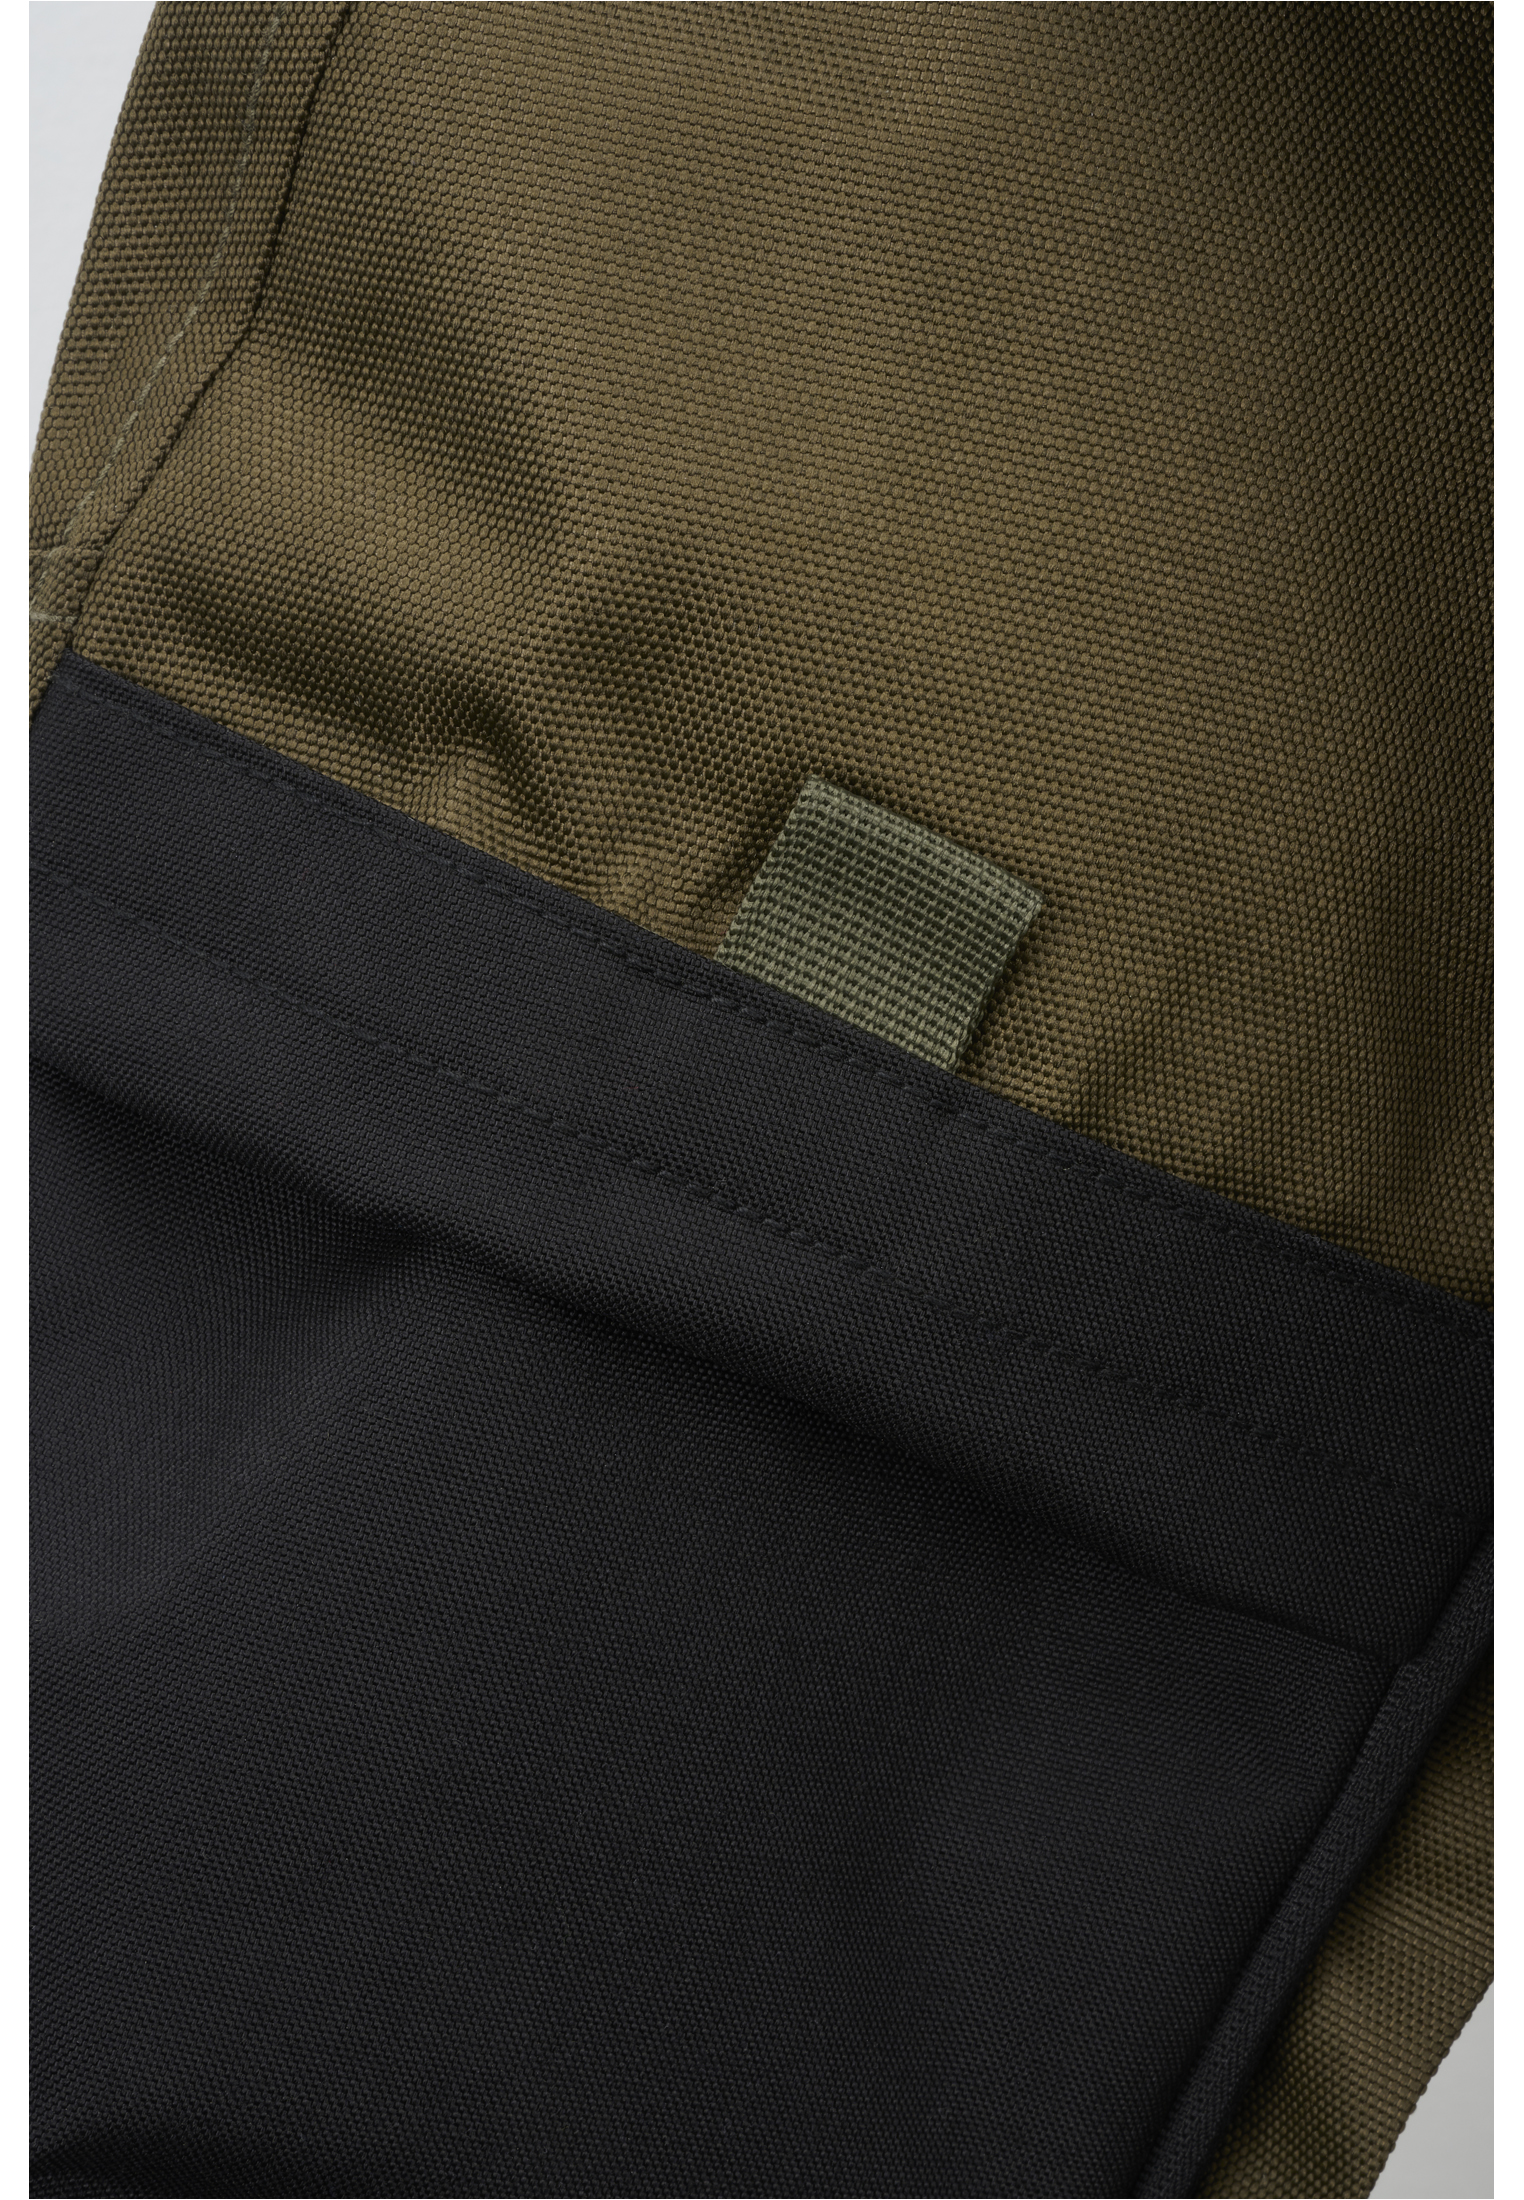 Jacken Performance Outdoorjacket in Farbe olive